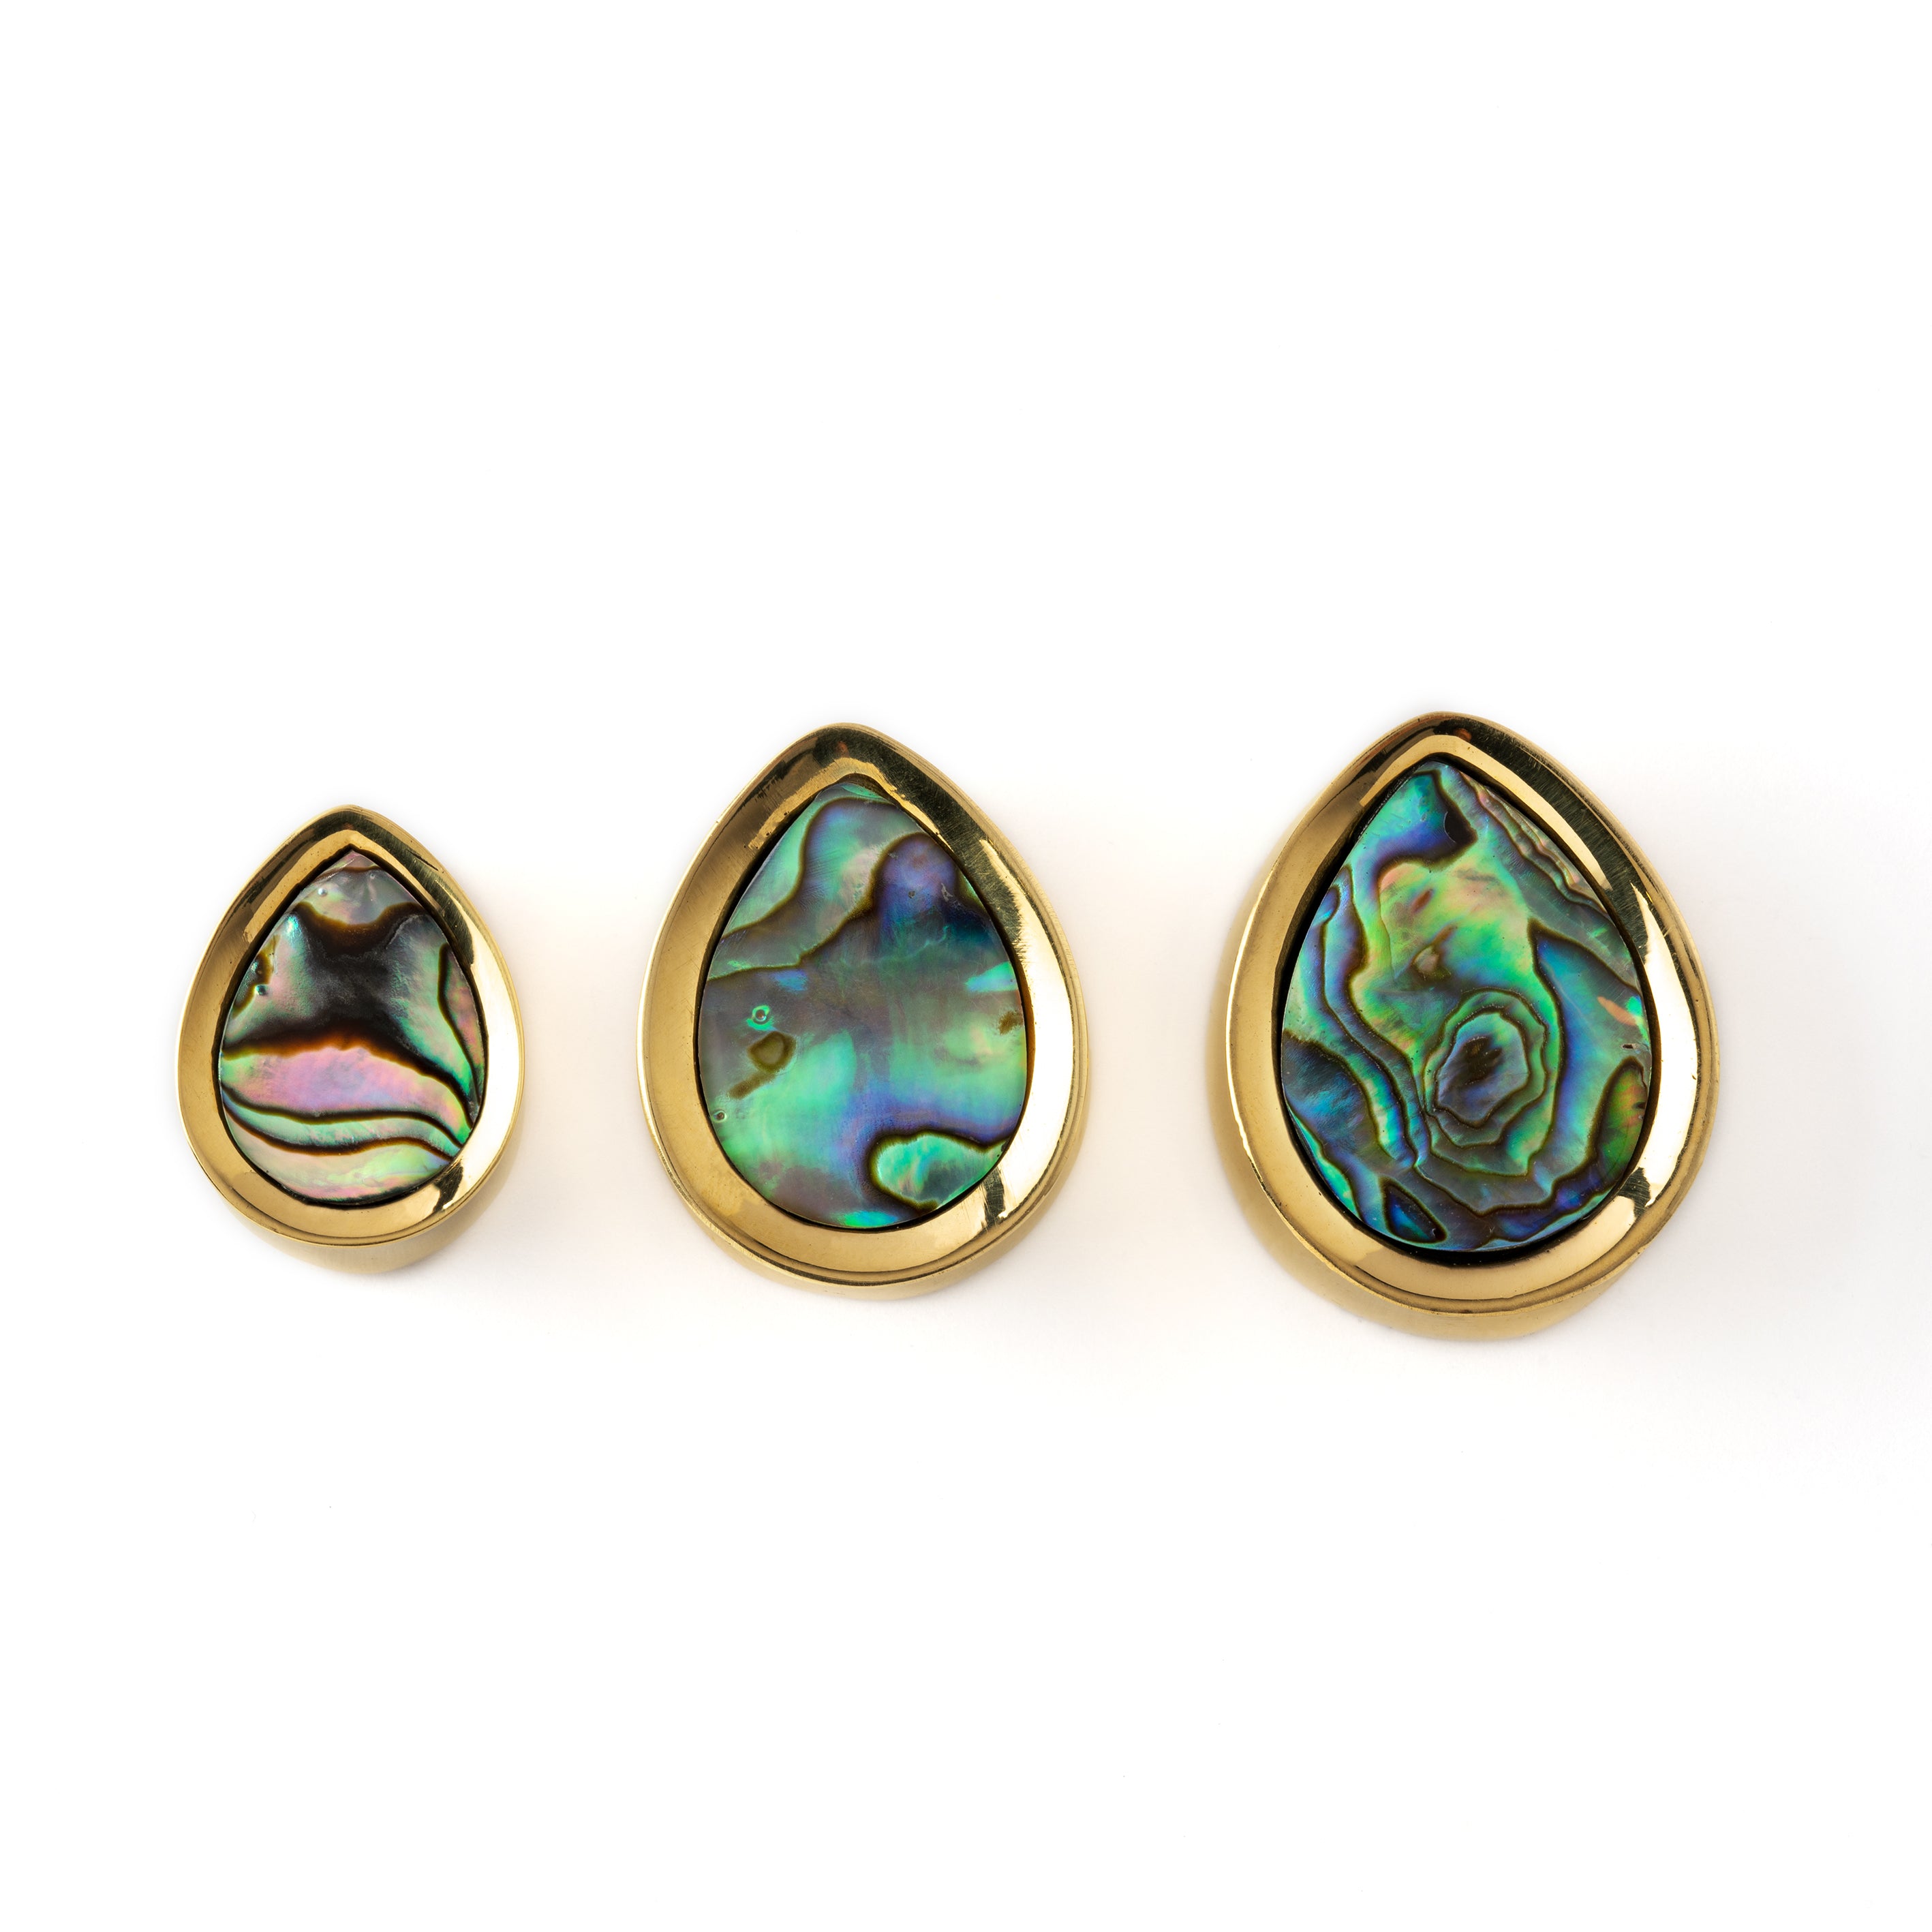 different sizes of golden teardrop shaped plug earrings with abalone shell inlay frontal view